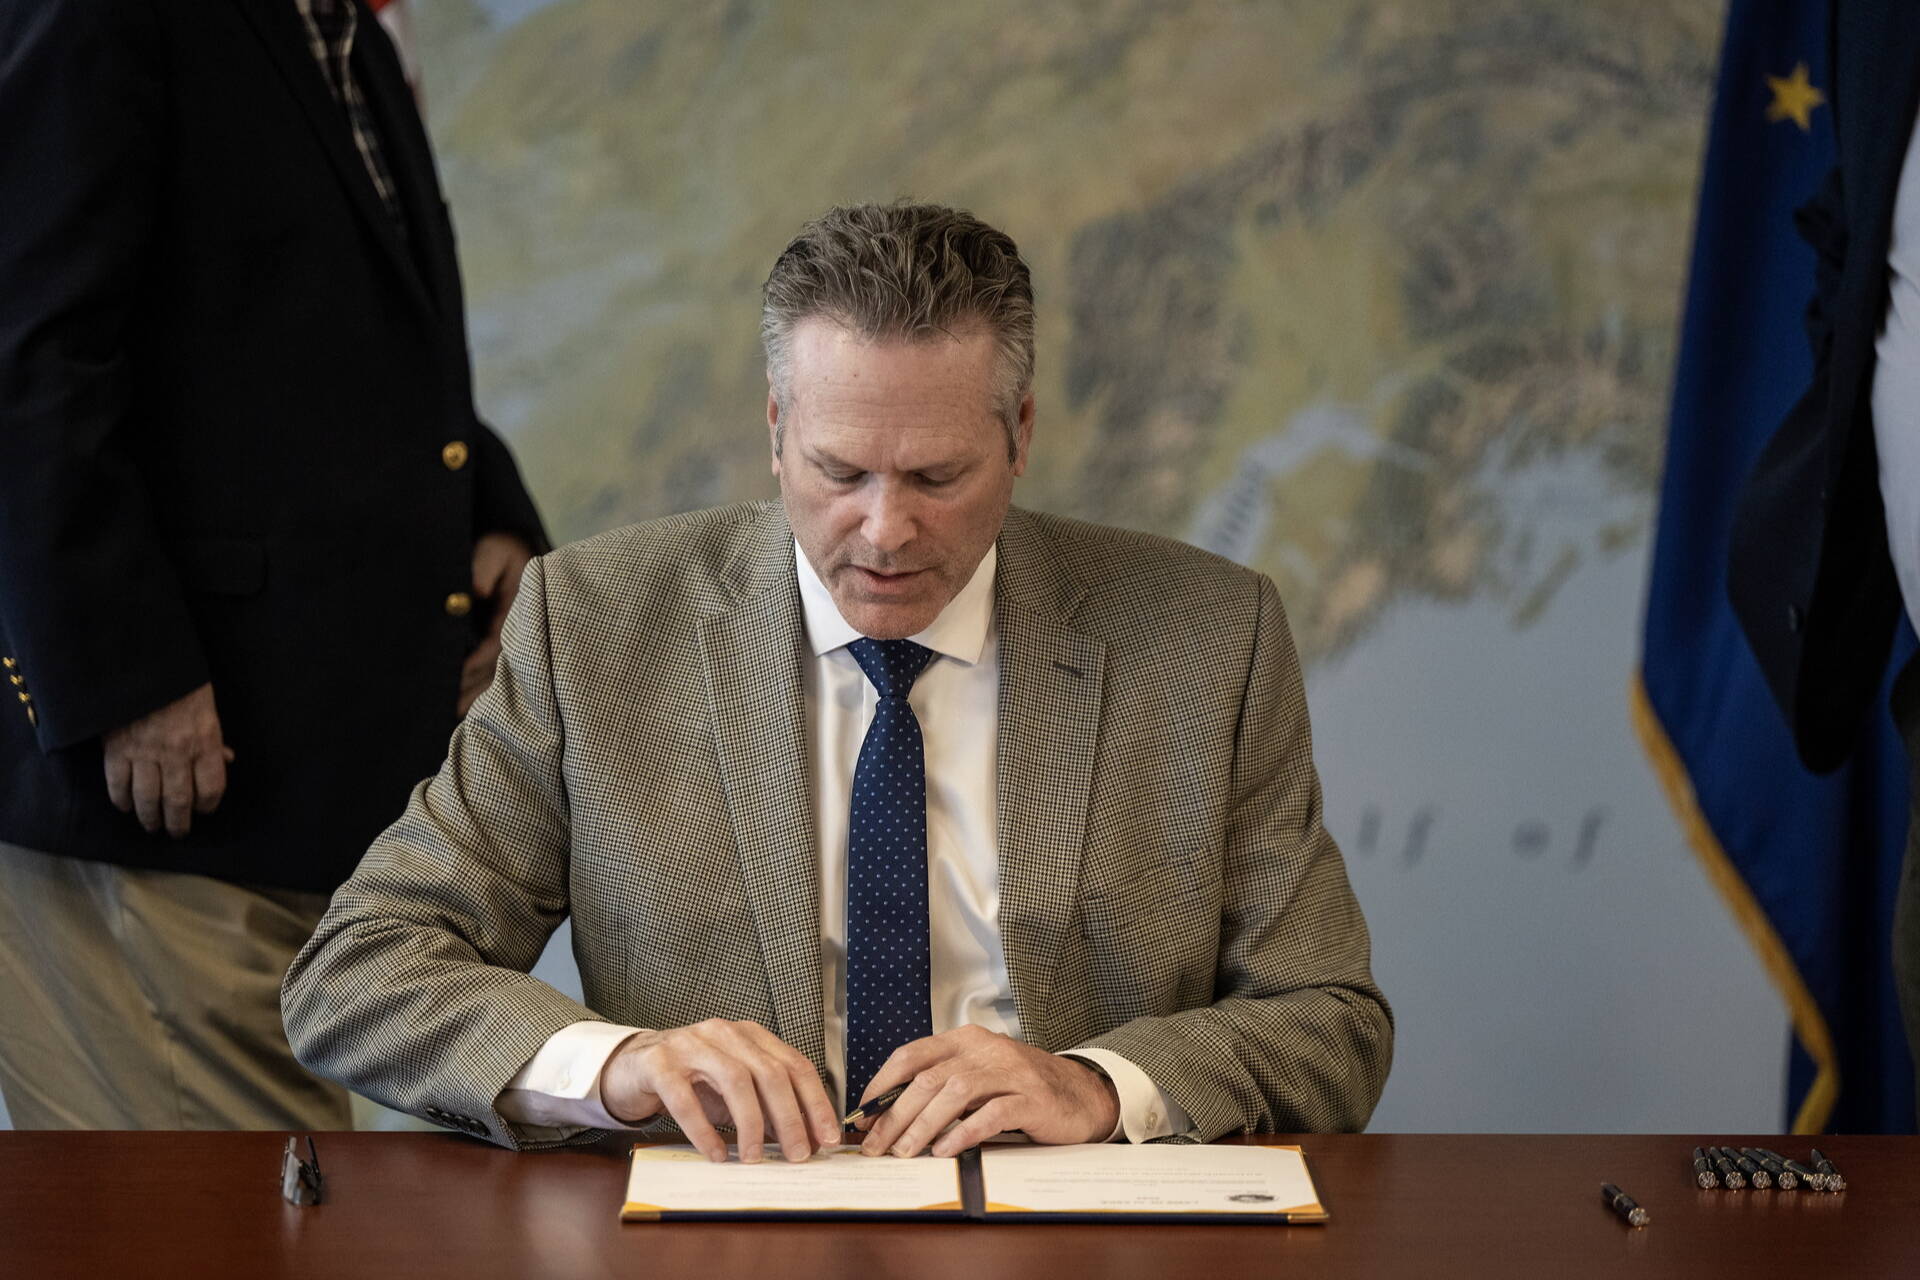 Gov. Mike Dunleavy signs bills for the state’s 2025 fiscal year budget during a private ceremony in Anchorage on Thursday. (Official photo from The Office of the Governor)